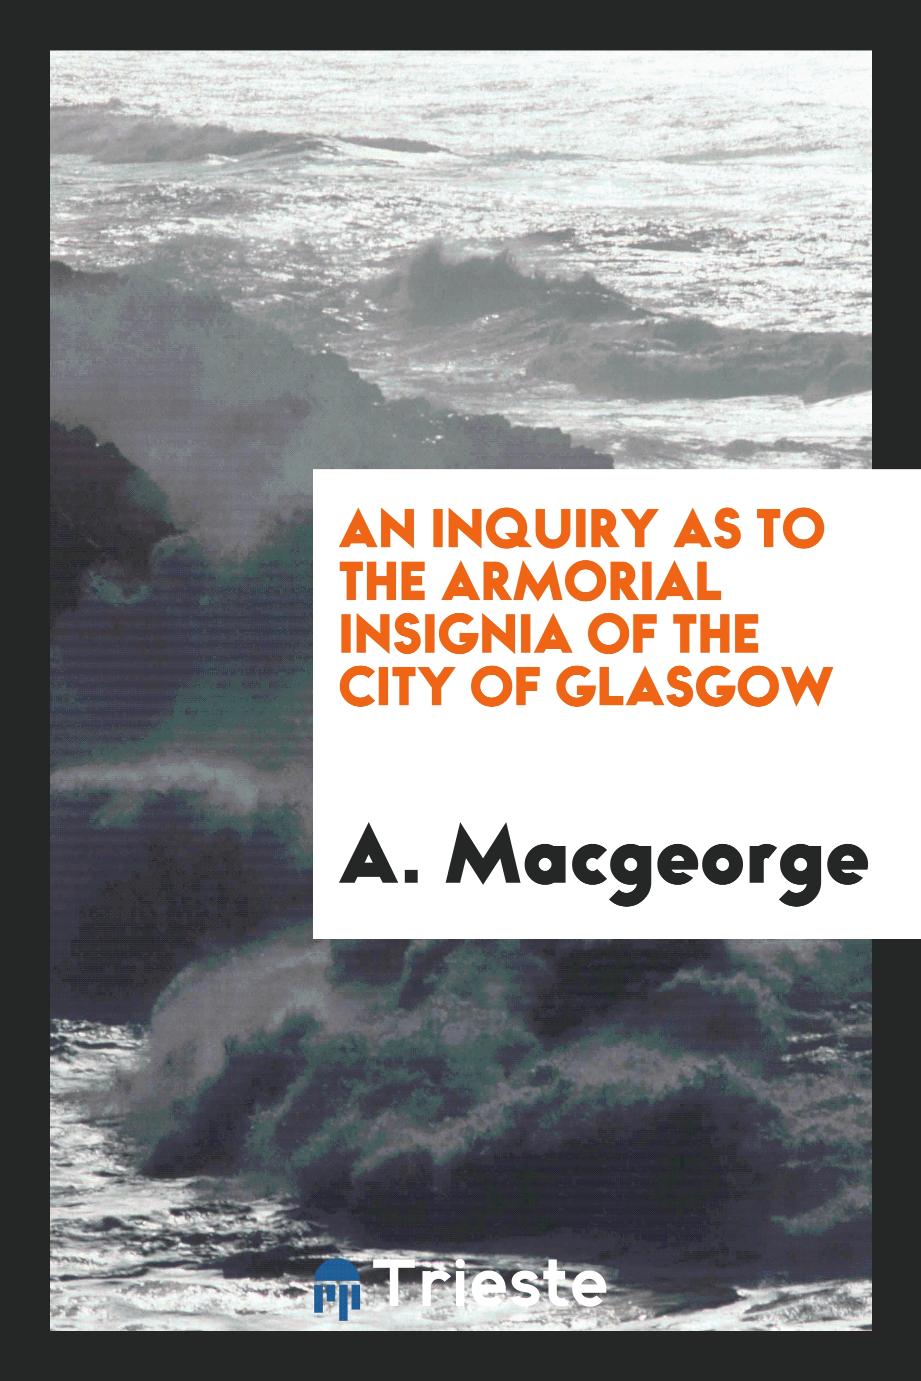 An Inquiry as to the Armorial Insignia of the City of Glasgow